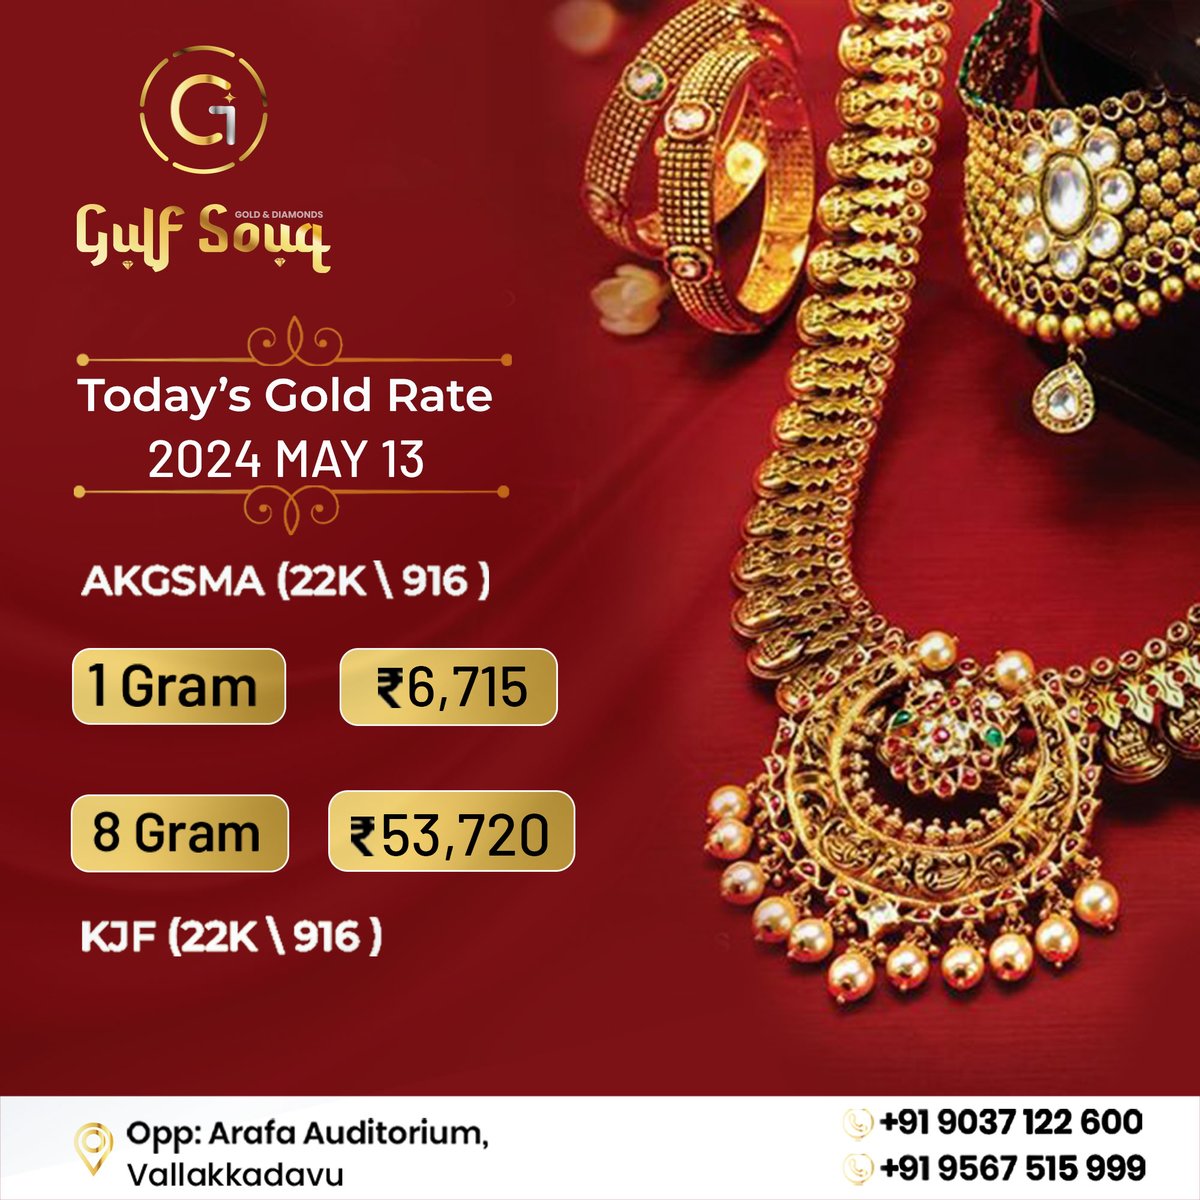 Welcome to a realm where every piece tells a story of elegance and refinement✨👑

☎️91 95675 05999
Today's Gold Rate:
1 Gram: 6,715/-
8 Gram: 53,720/-

#GulfSouq #JewelleryWholesaler #WholesaleJewellery
#LuxuryFashion #jewellery
#jewelry #fashion #earrings #necklace